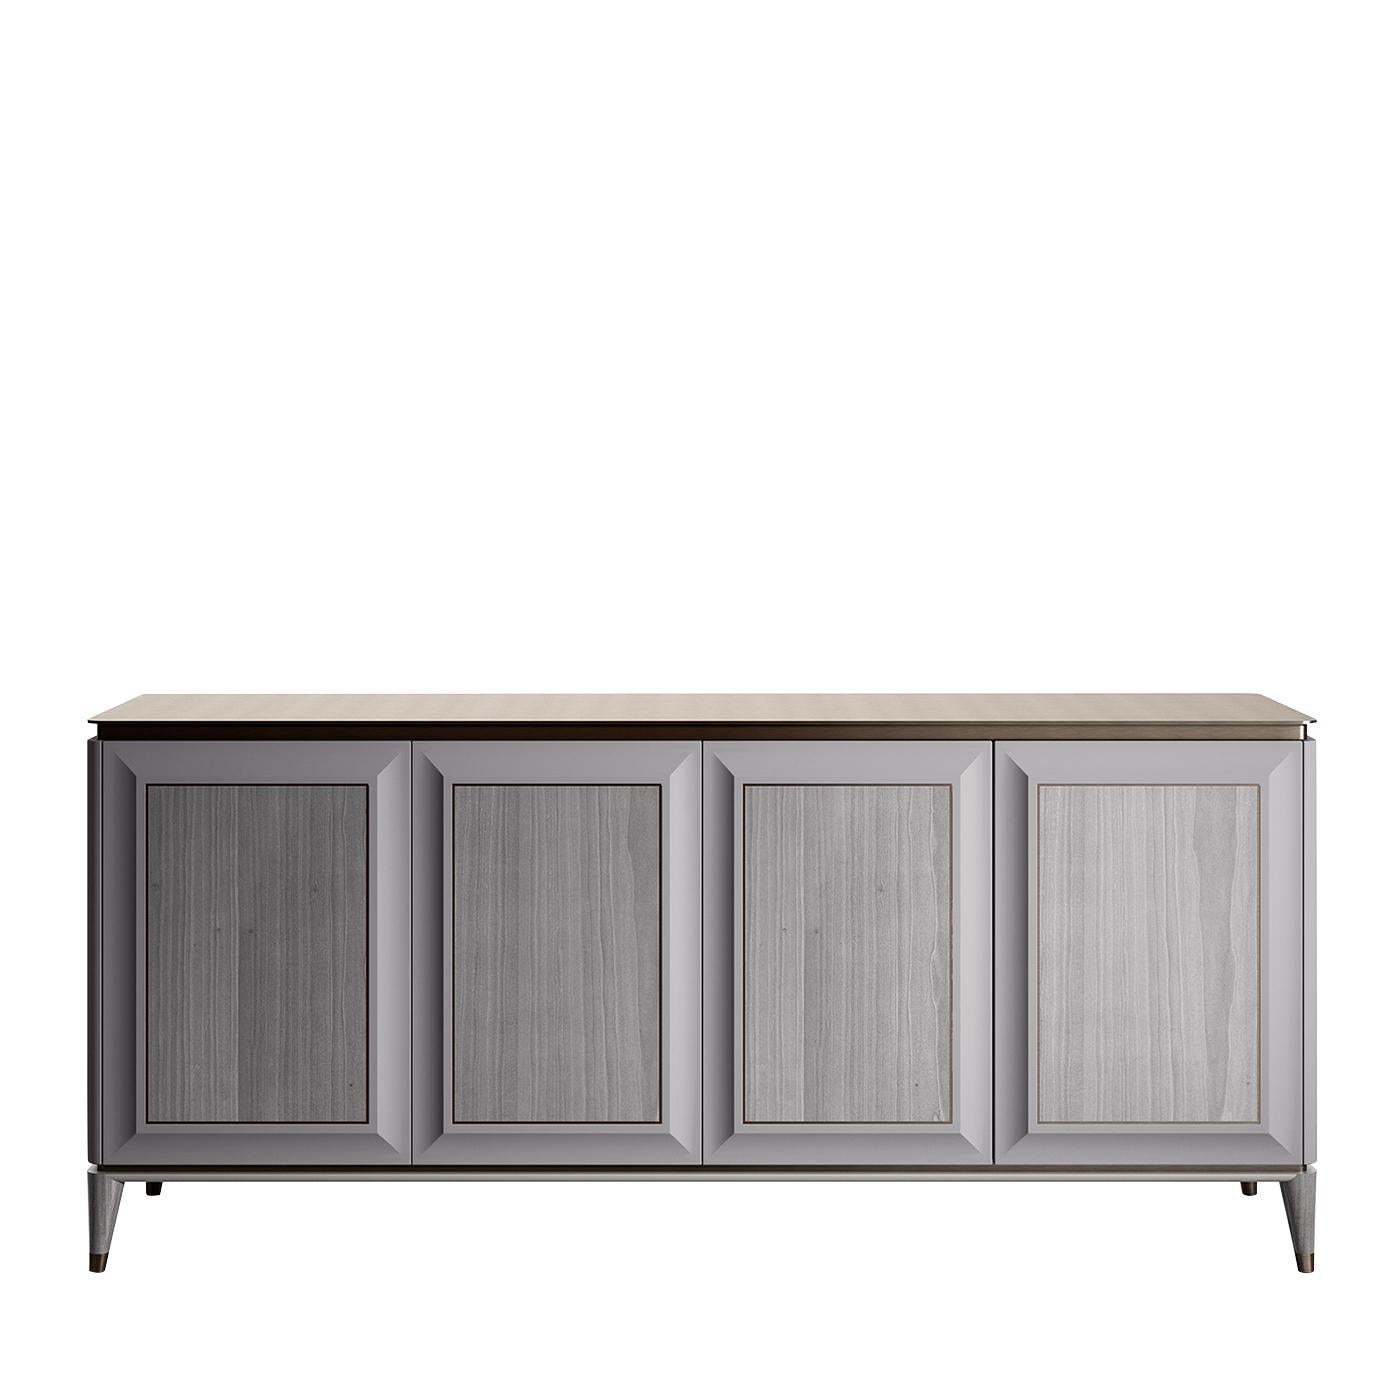 Clever contours and functional details define this elegant sideboard in grey lacquered wood with a velvet-like finish that floats on four angled, tapered legs. Four veneered doors raised on a bevelled frame are accented with a delicate brown profile